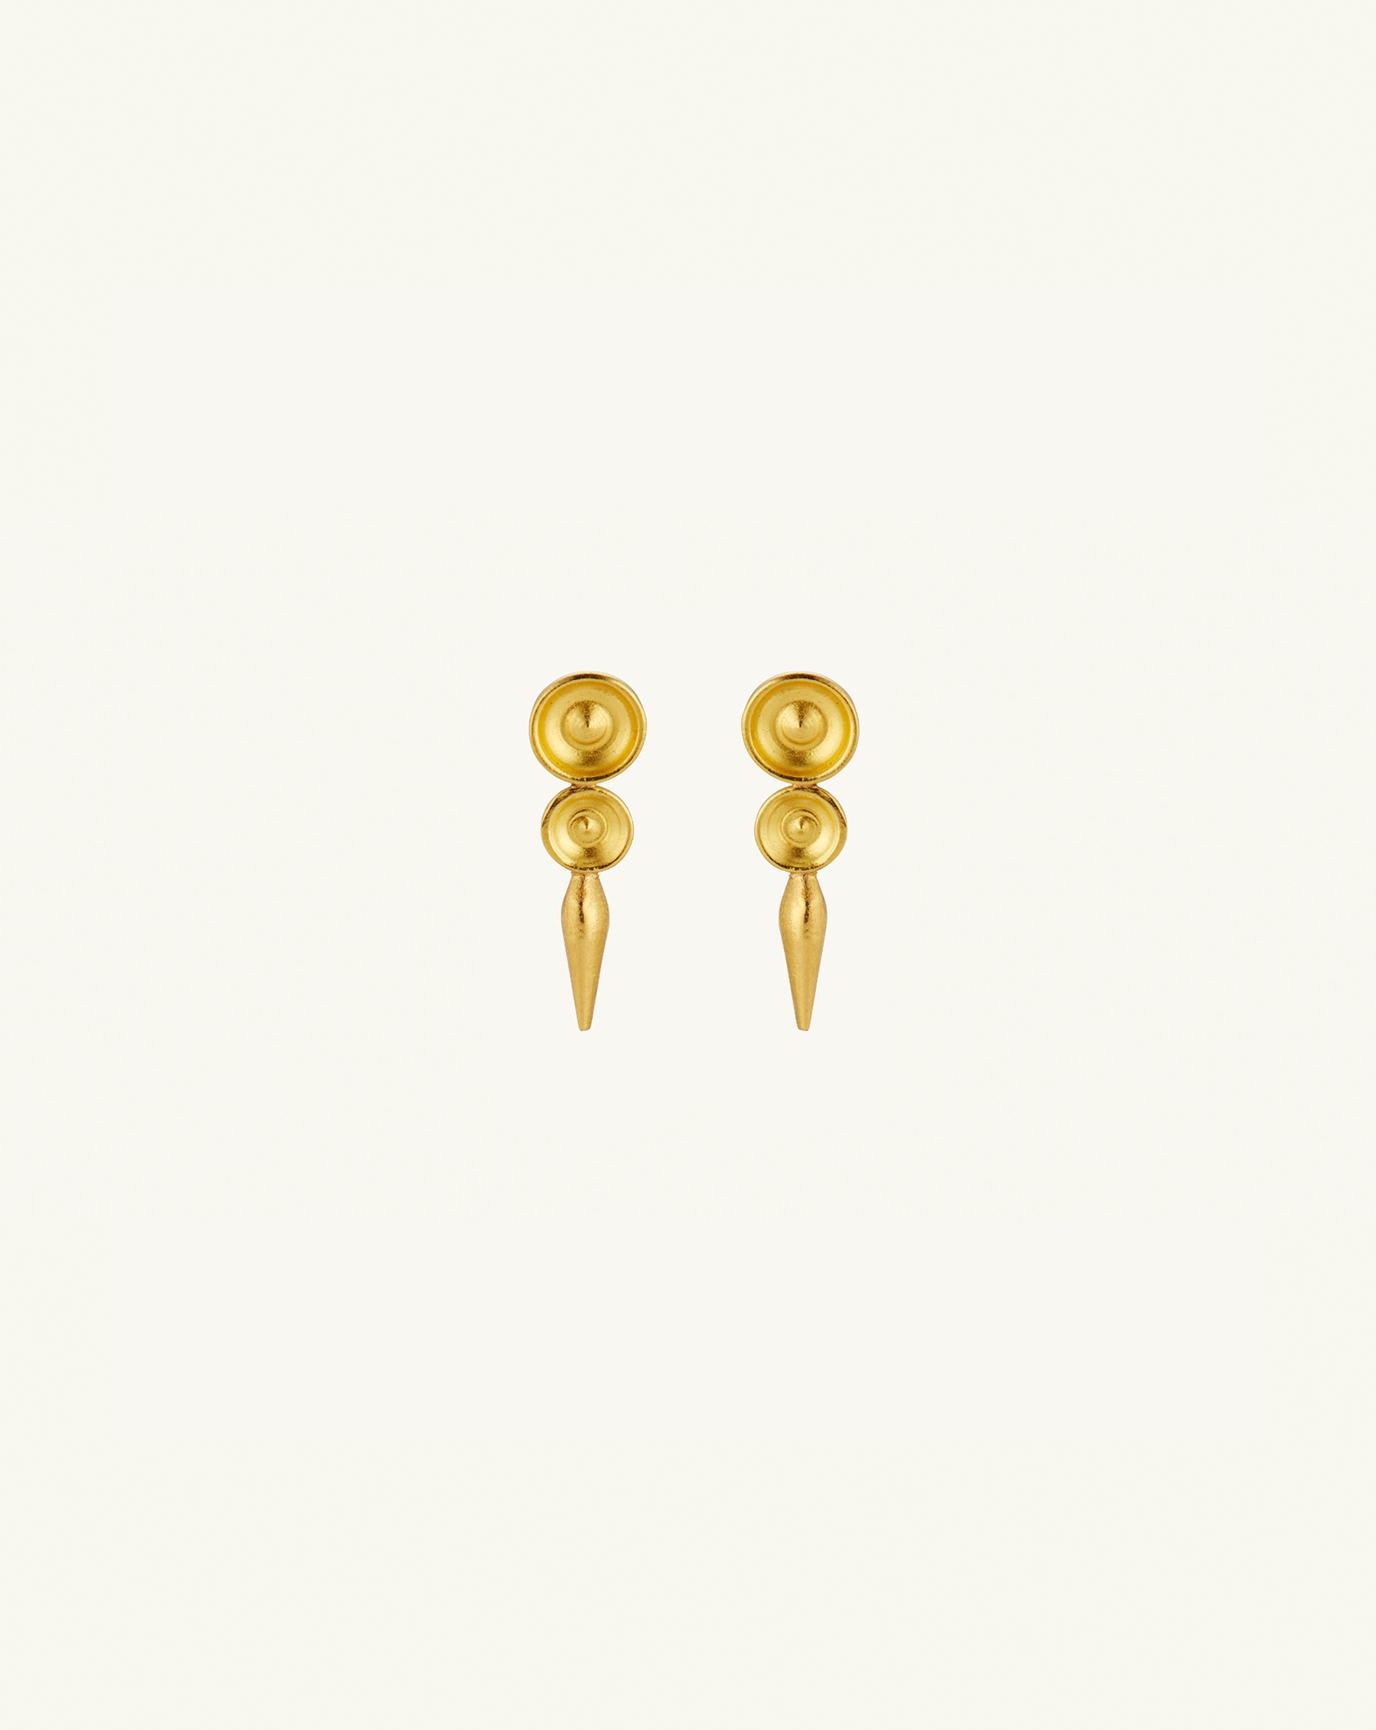 Product image of the Concave pod drop stud earrings in gold